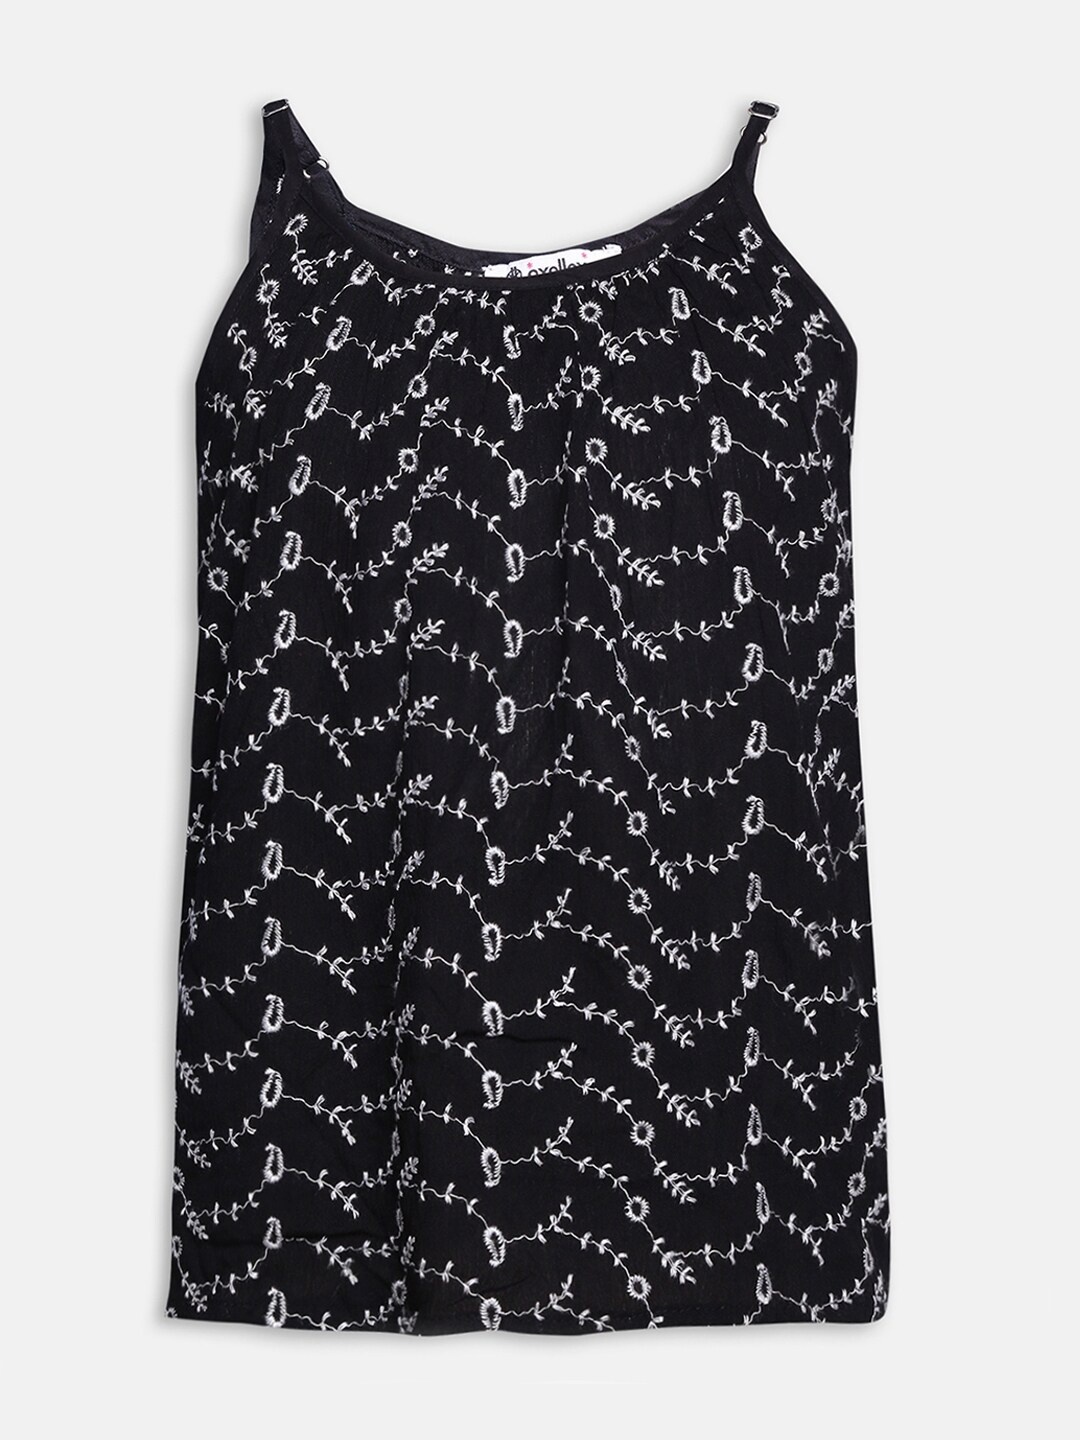 

Oxolloxo Black & White Embroidered Regular Top